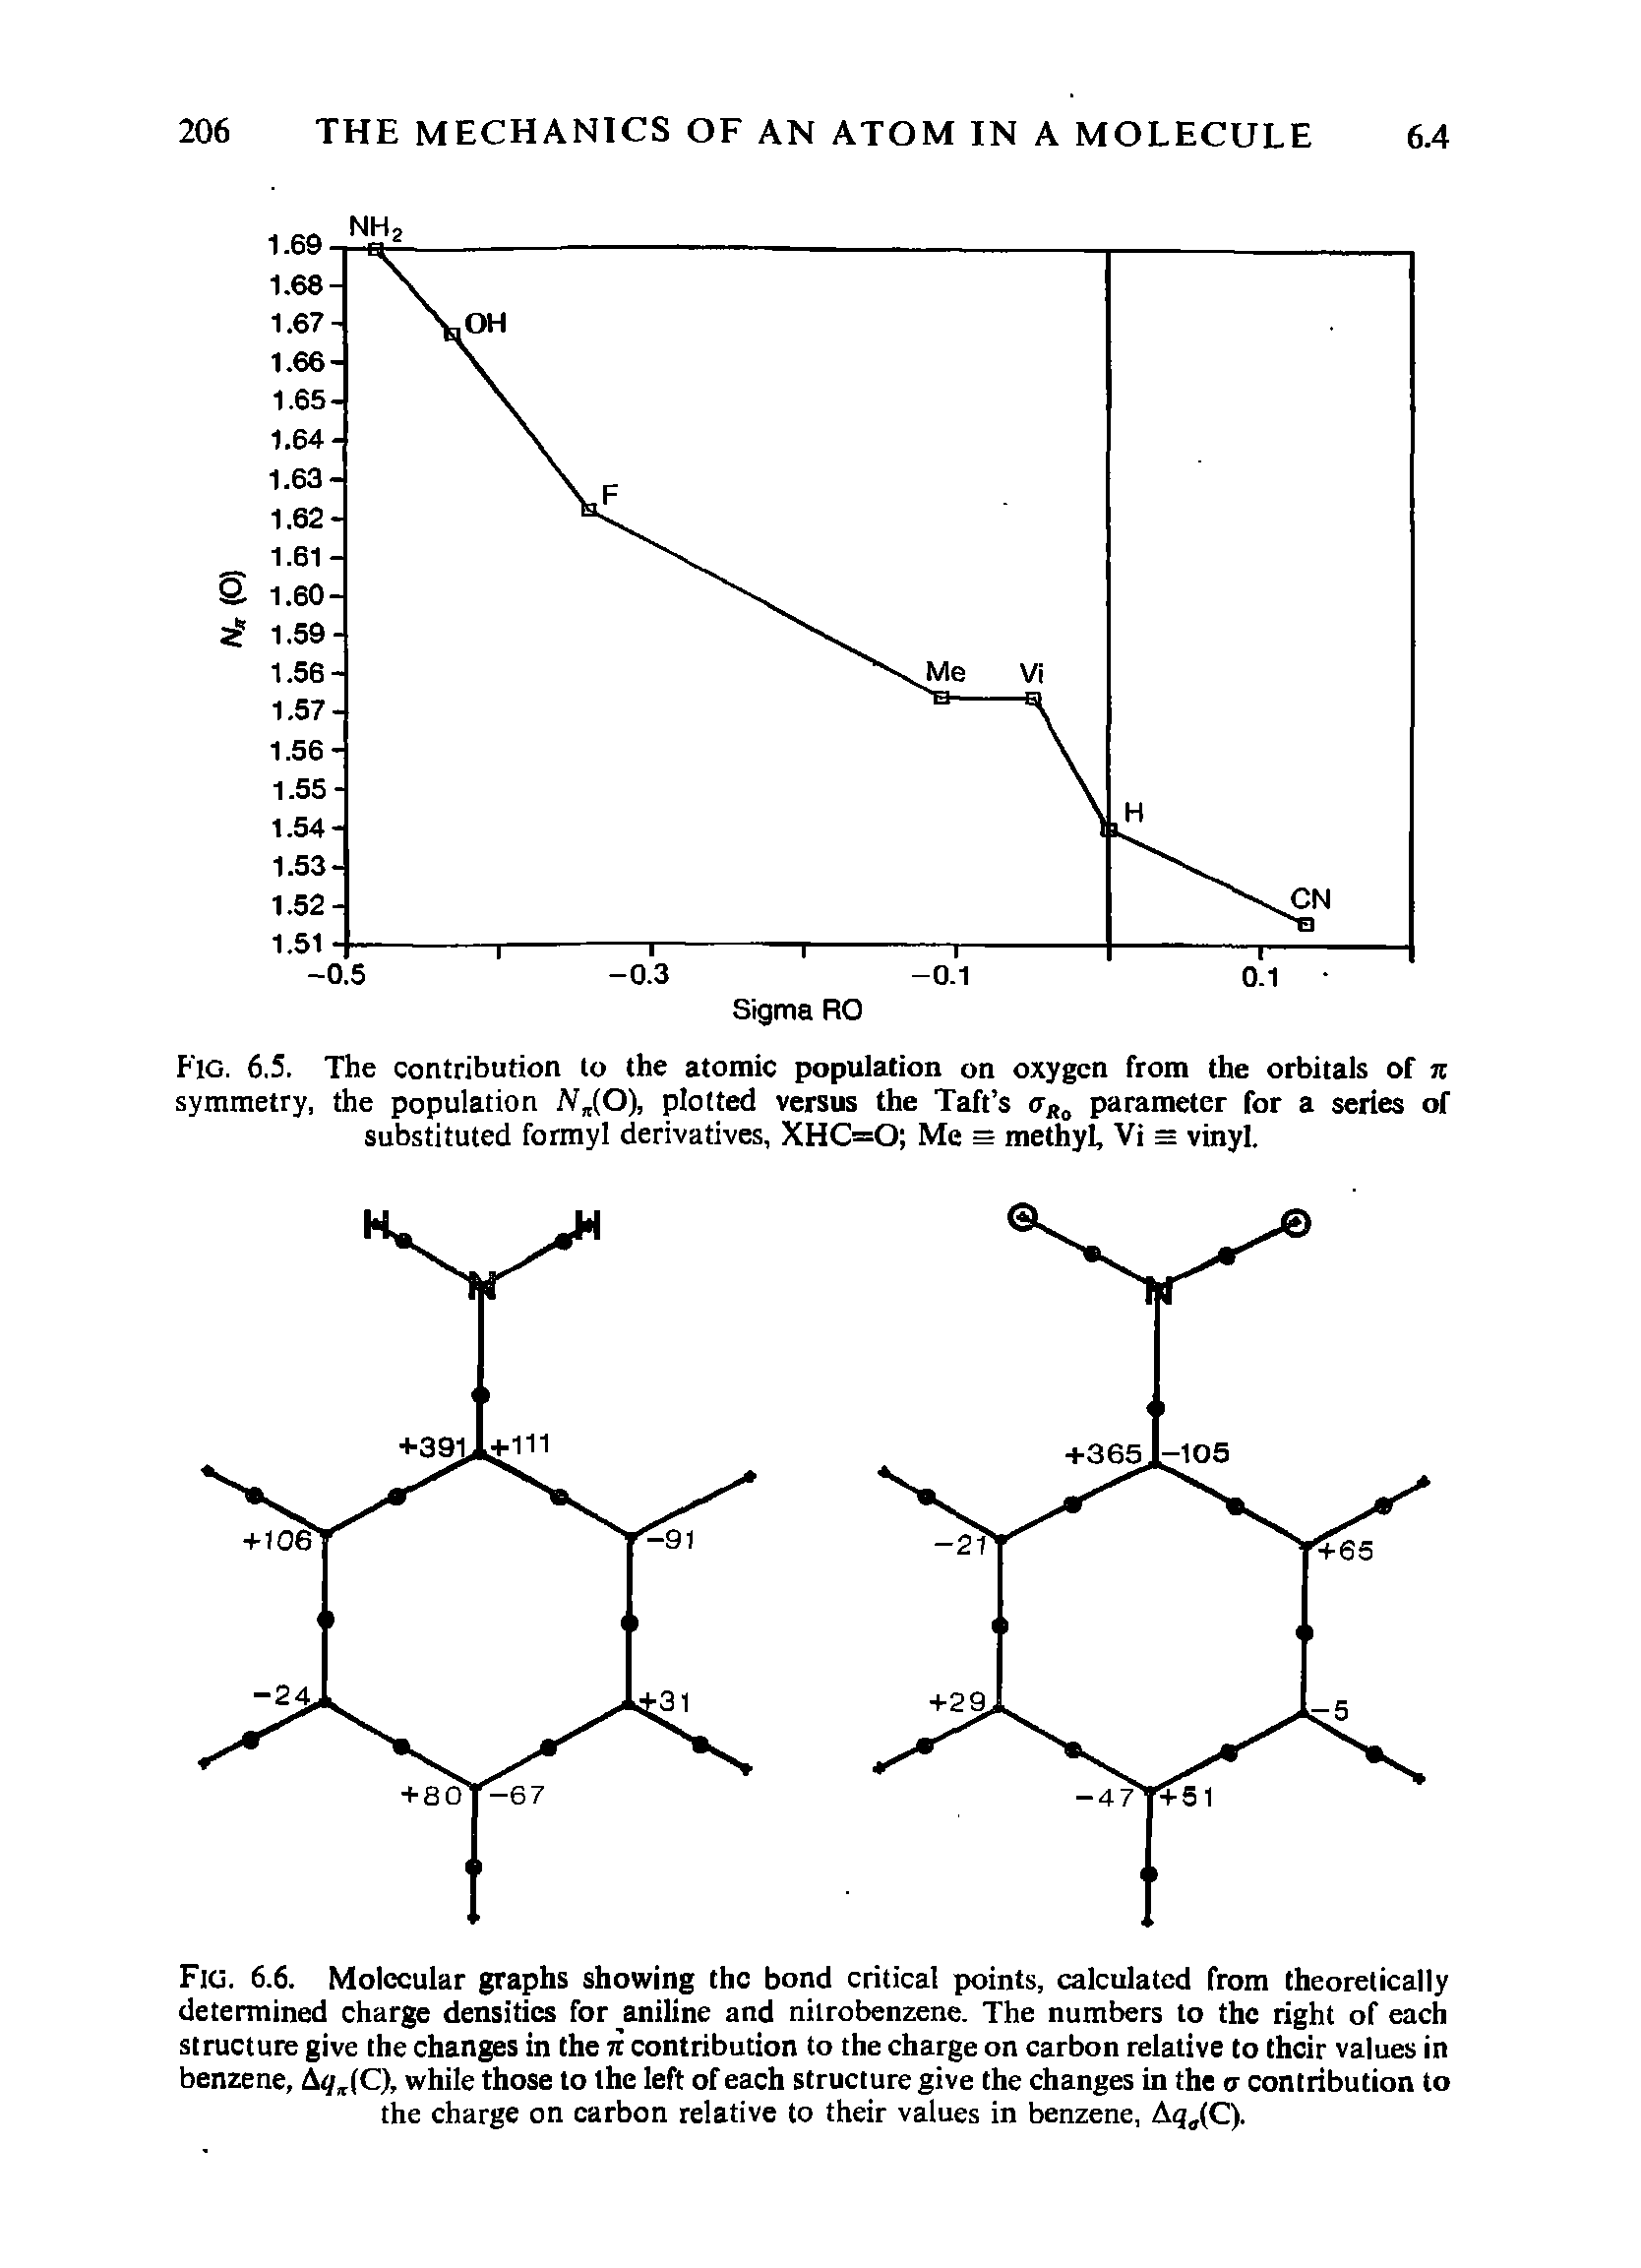 Fig. 6.5. The contribution to the atomic population on oxygen from the orbitals of n symmetry, the population iV (0), plotted versus the Taft s (r parameter for a series of substituted formyl derivatives, XHC=0 Me = methyl, Vi = vinyl.